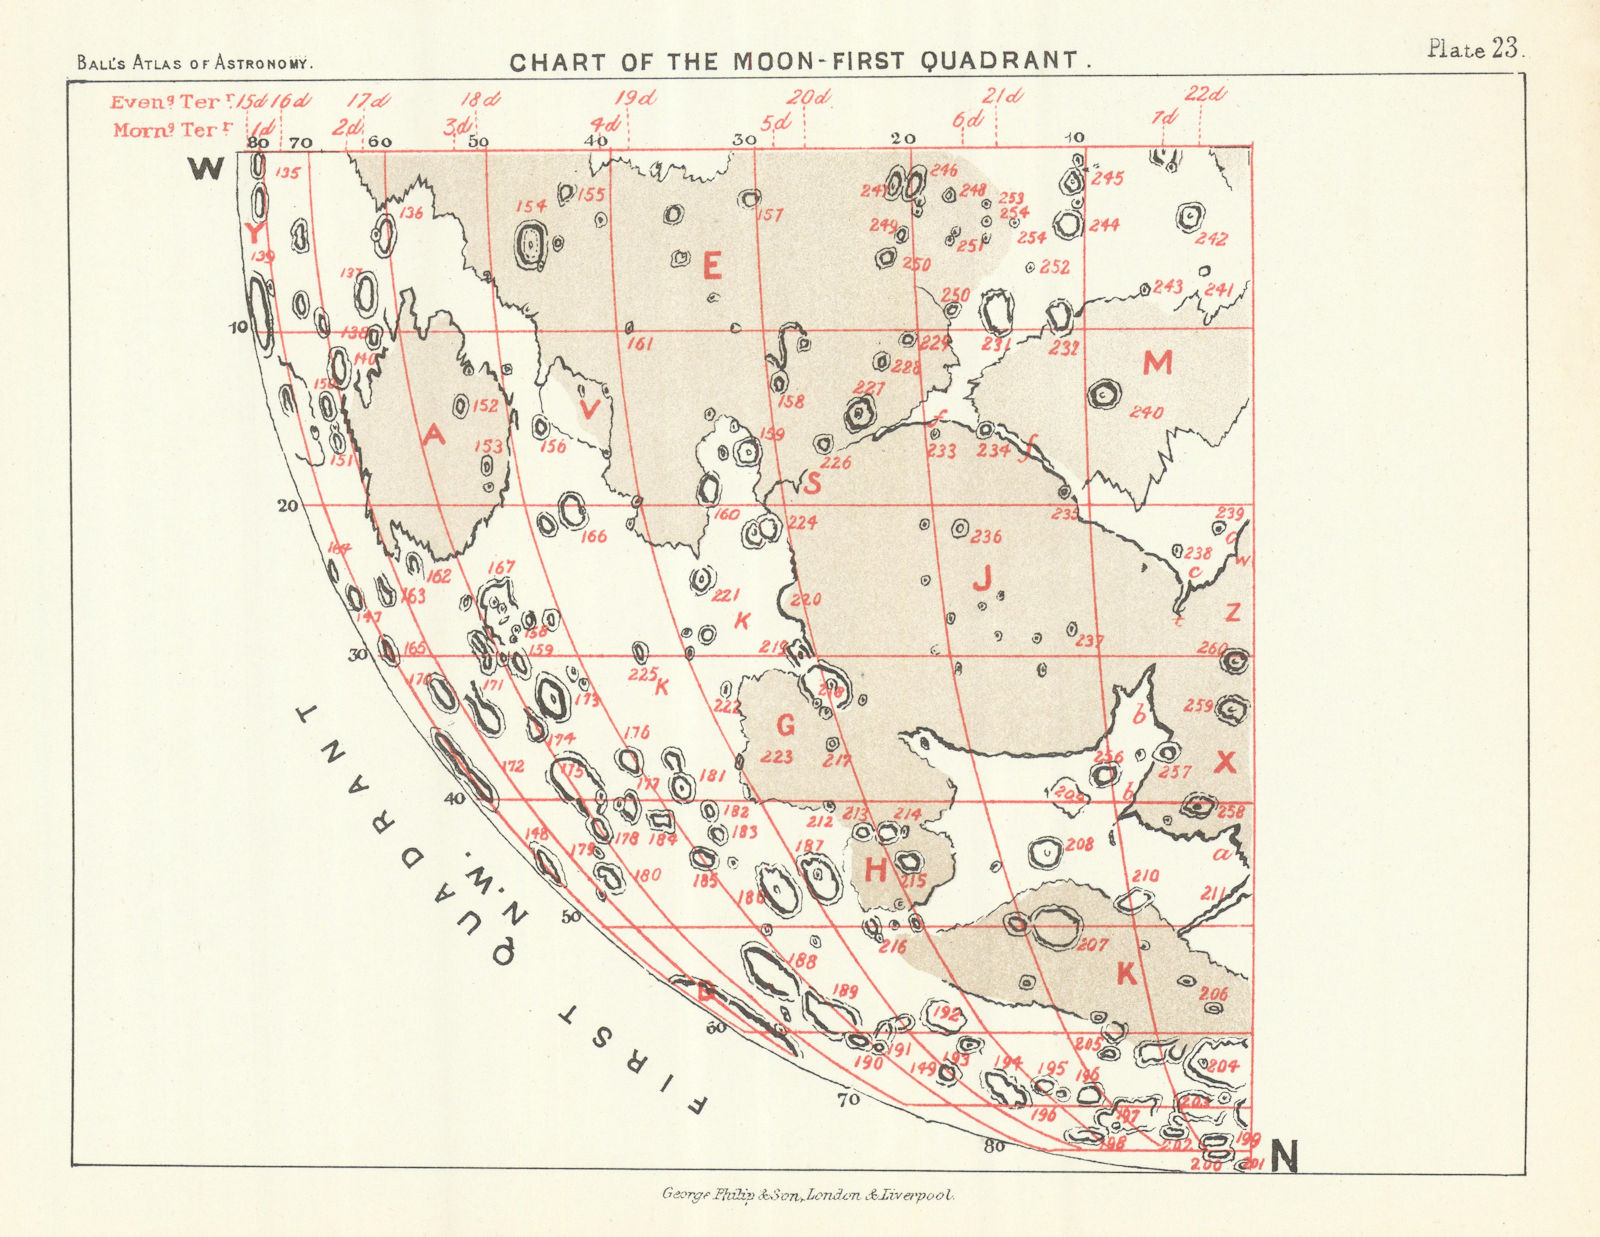 Chart of the Moon 1st Quadrant - North West - by Robert Ball. Astronomy 1892 map